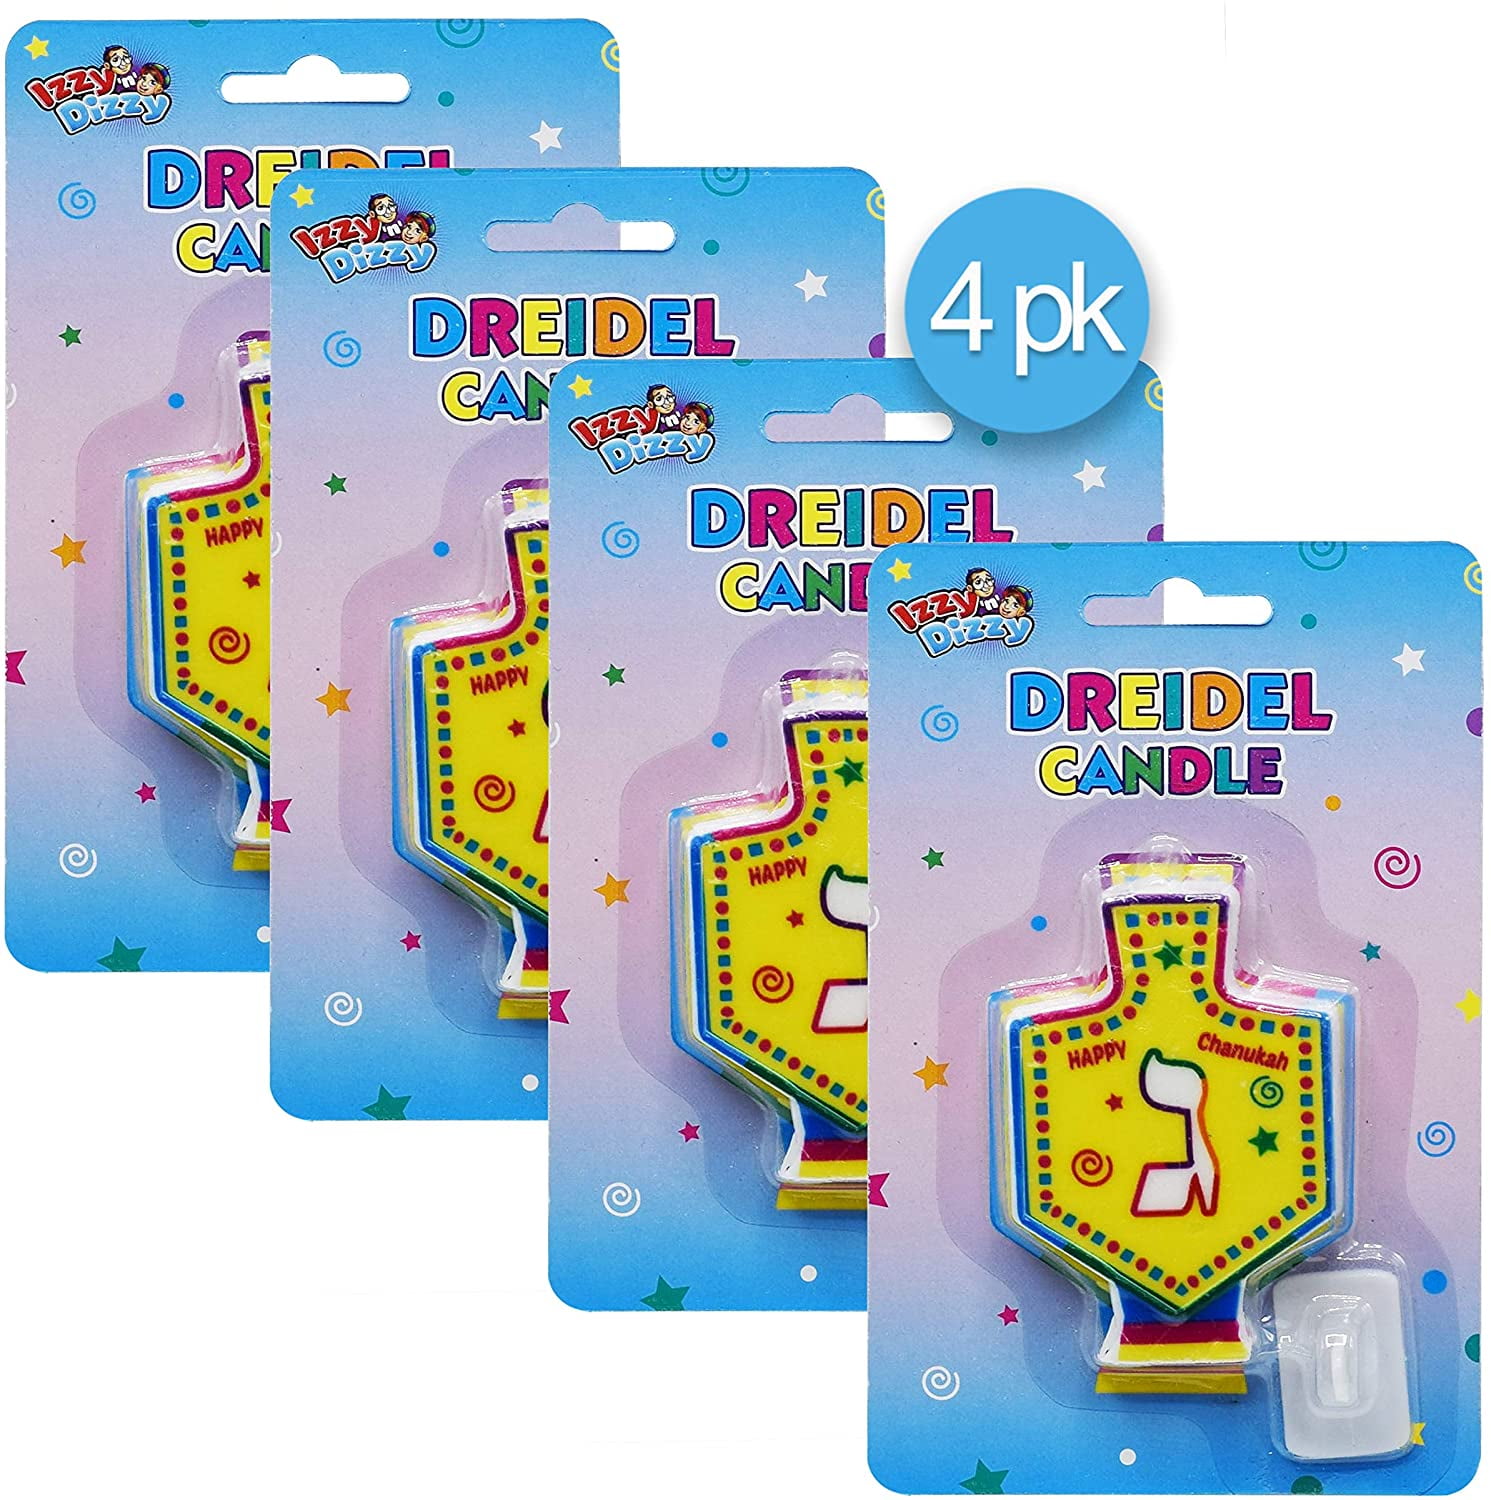 Izzy ‘n’ Dizzy Dreidel Shaped Candle with Stand Hanukkah Party Decorations and Supplies Izzy 'n' Dizzy 4 Pack 